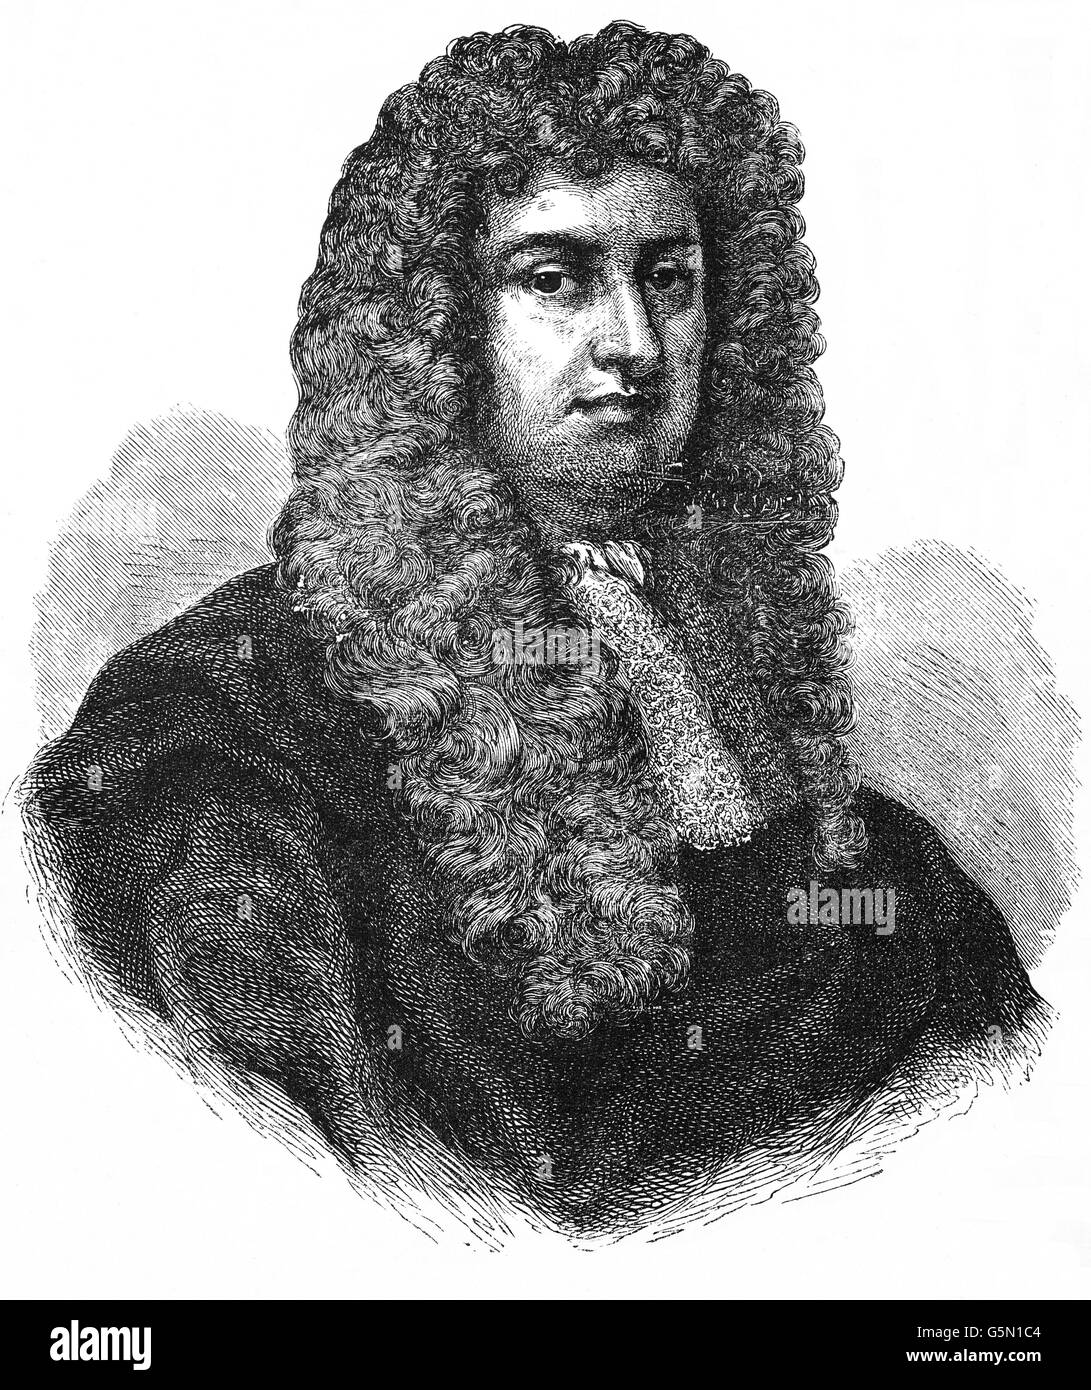 William Russell, Lord Russell (1639 – 1683), English politician. He was a leading member of the Country Party, forerunners of the Whigs, who laid the groundwork for opposition in the House of Commons of England during the reign of King Charles II but was executed for treason, almost two years before King Charles died and James acceded to the throne. Stock Photo